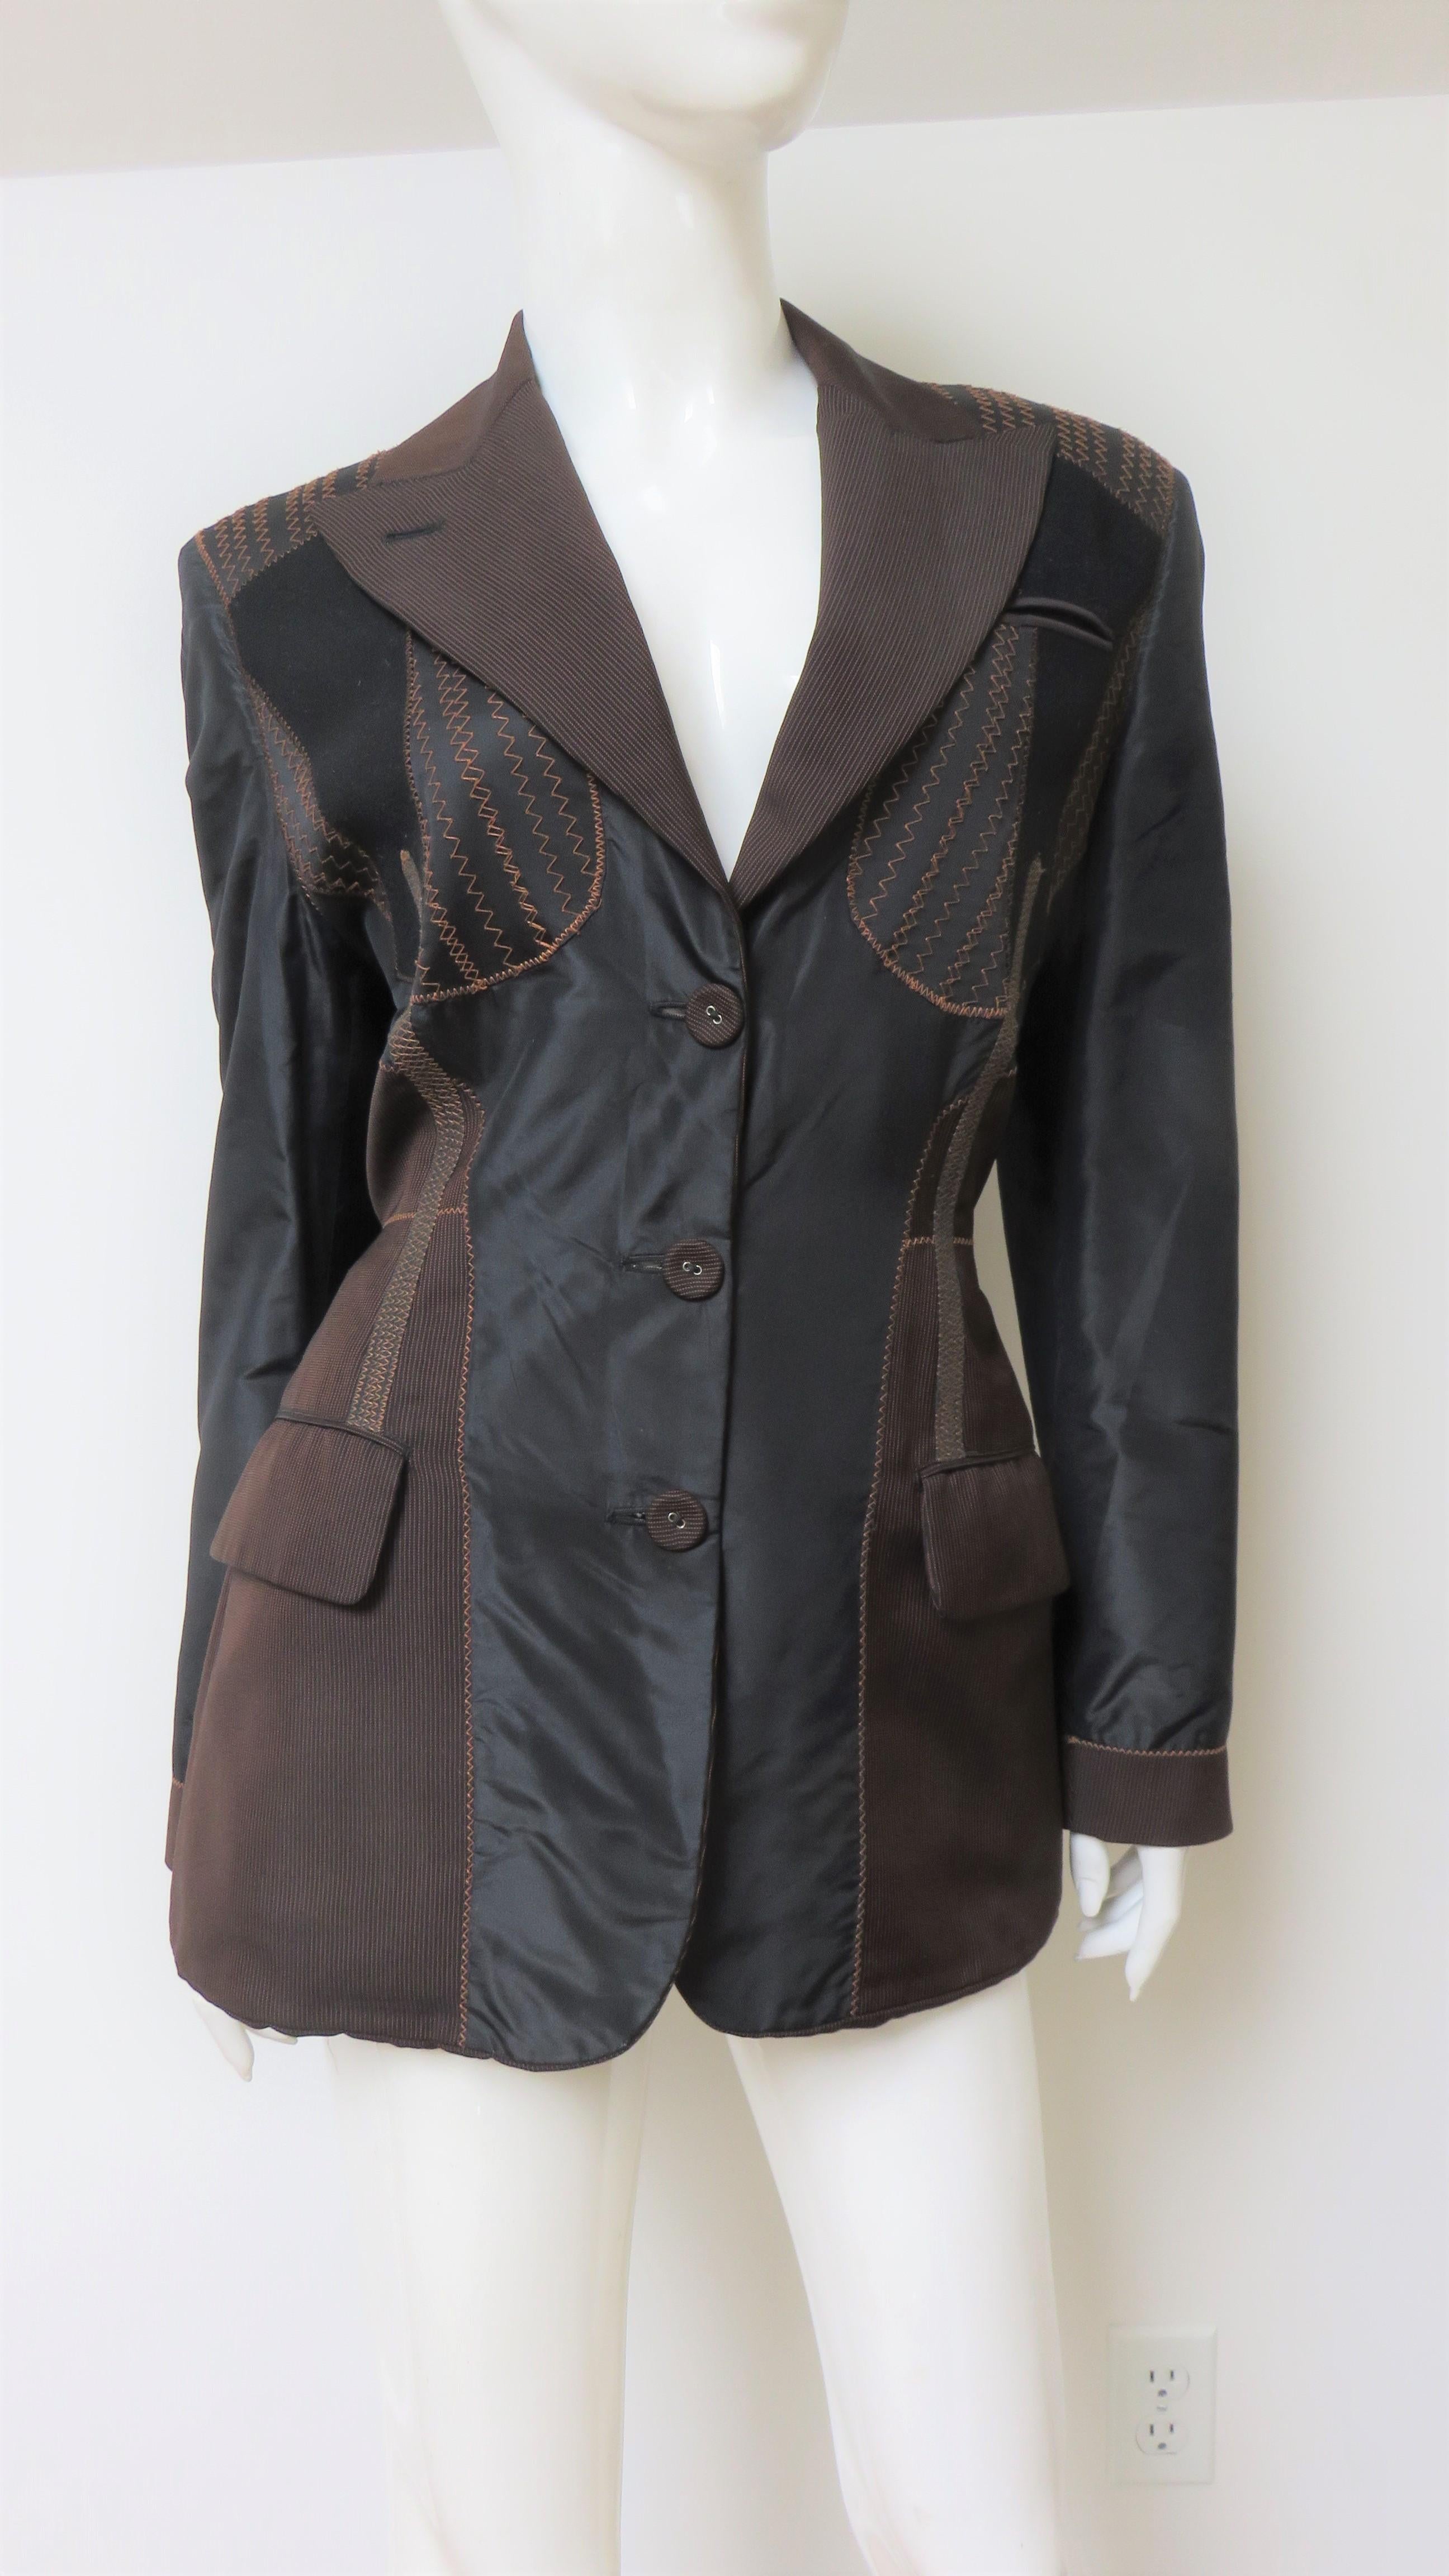 A fabulous silk patchwork jacket from Jean Paul Gaultier.  It is a blazer style jacket with a lapel collar, flap front hip pockets, a welt chest pocket and a button front closure. The front has a brown fine striped collar and sides framing a black